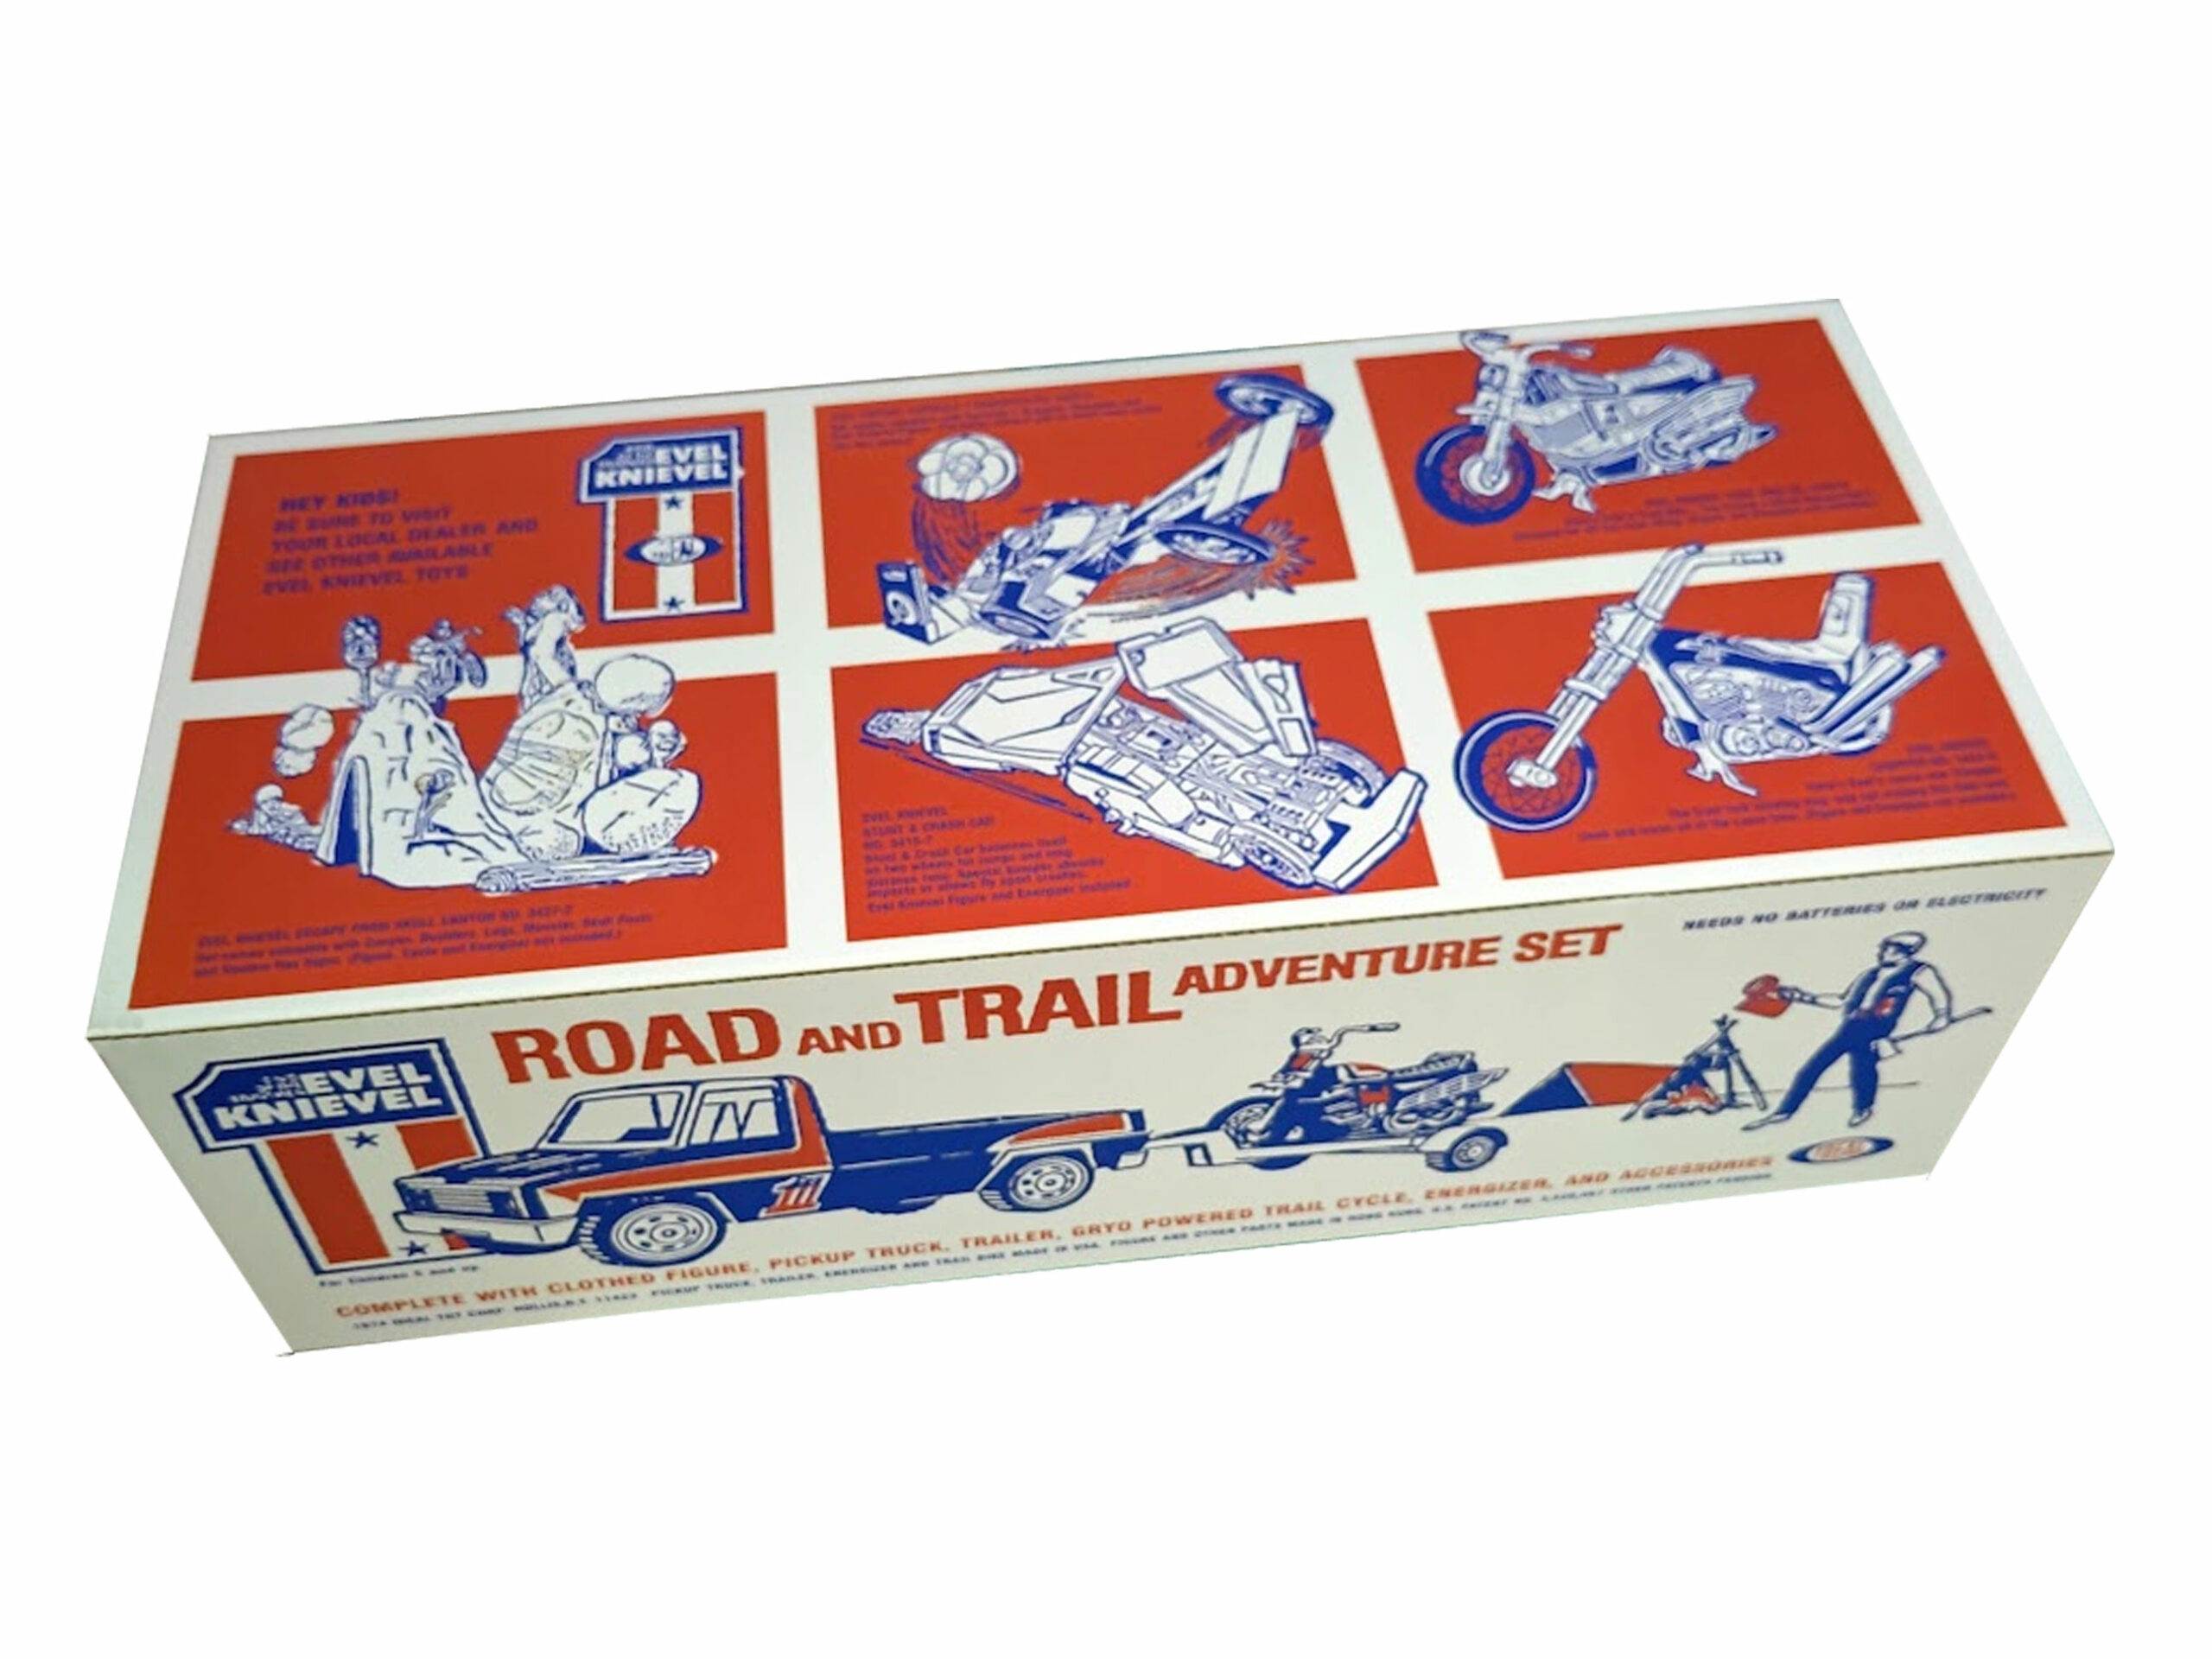 Ideal Toys Evel Knievel Road and Trail Set Reproduction Box